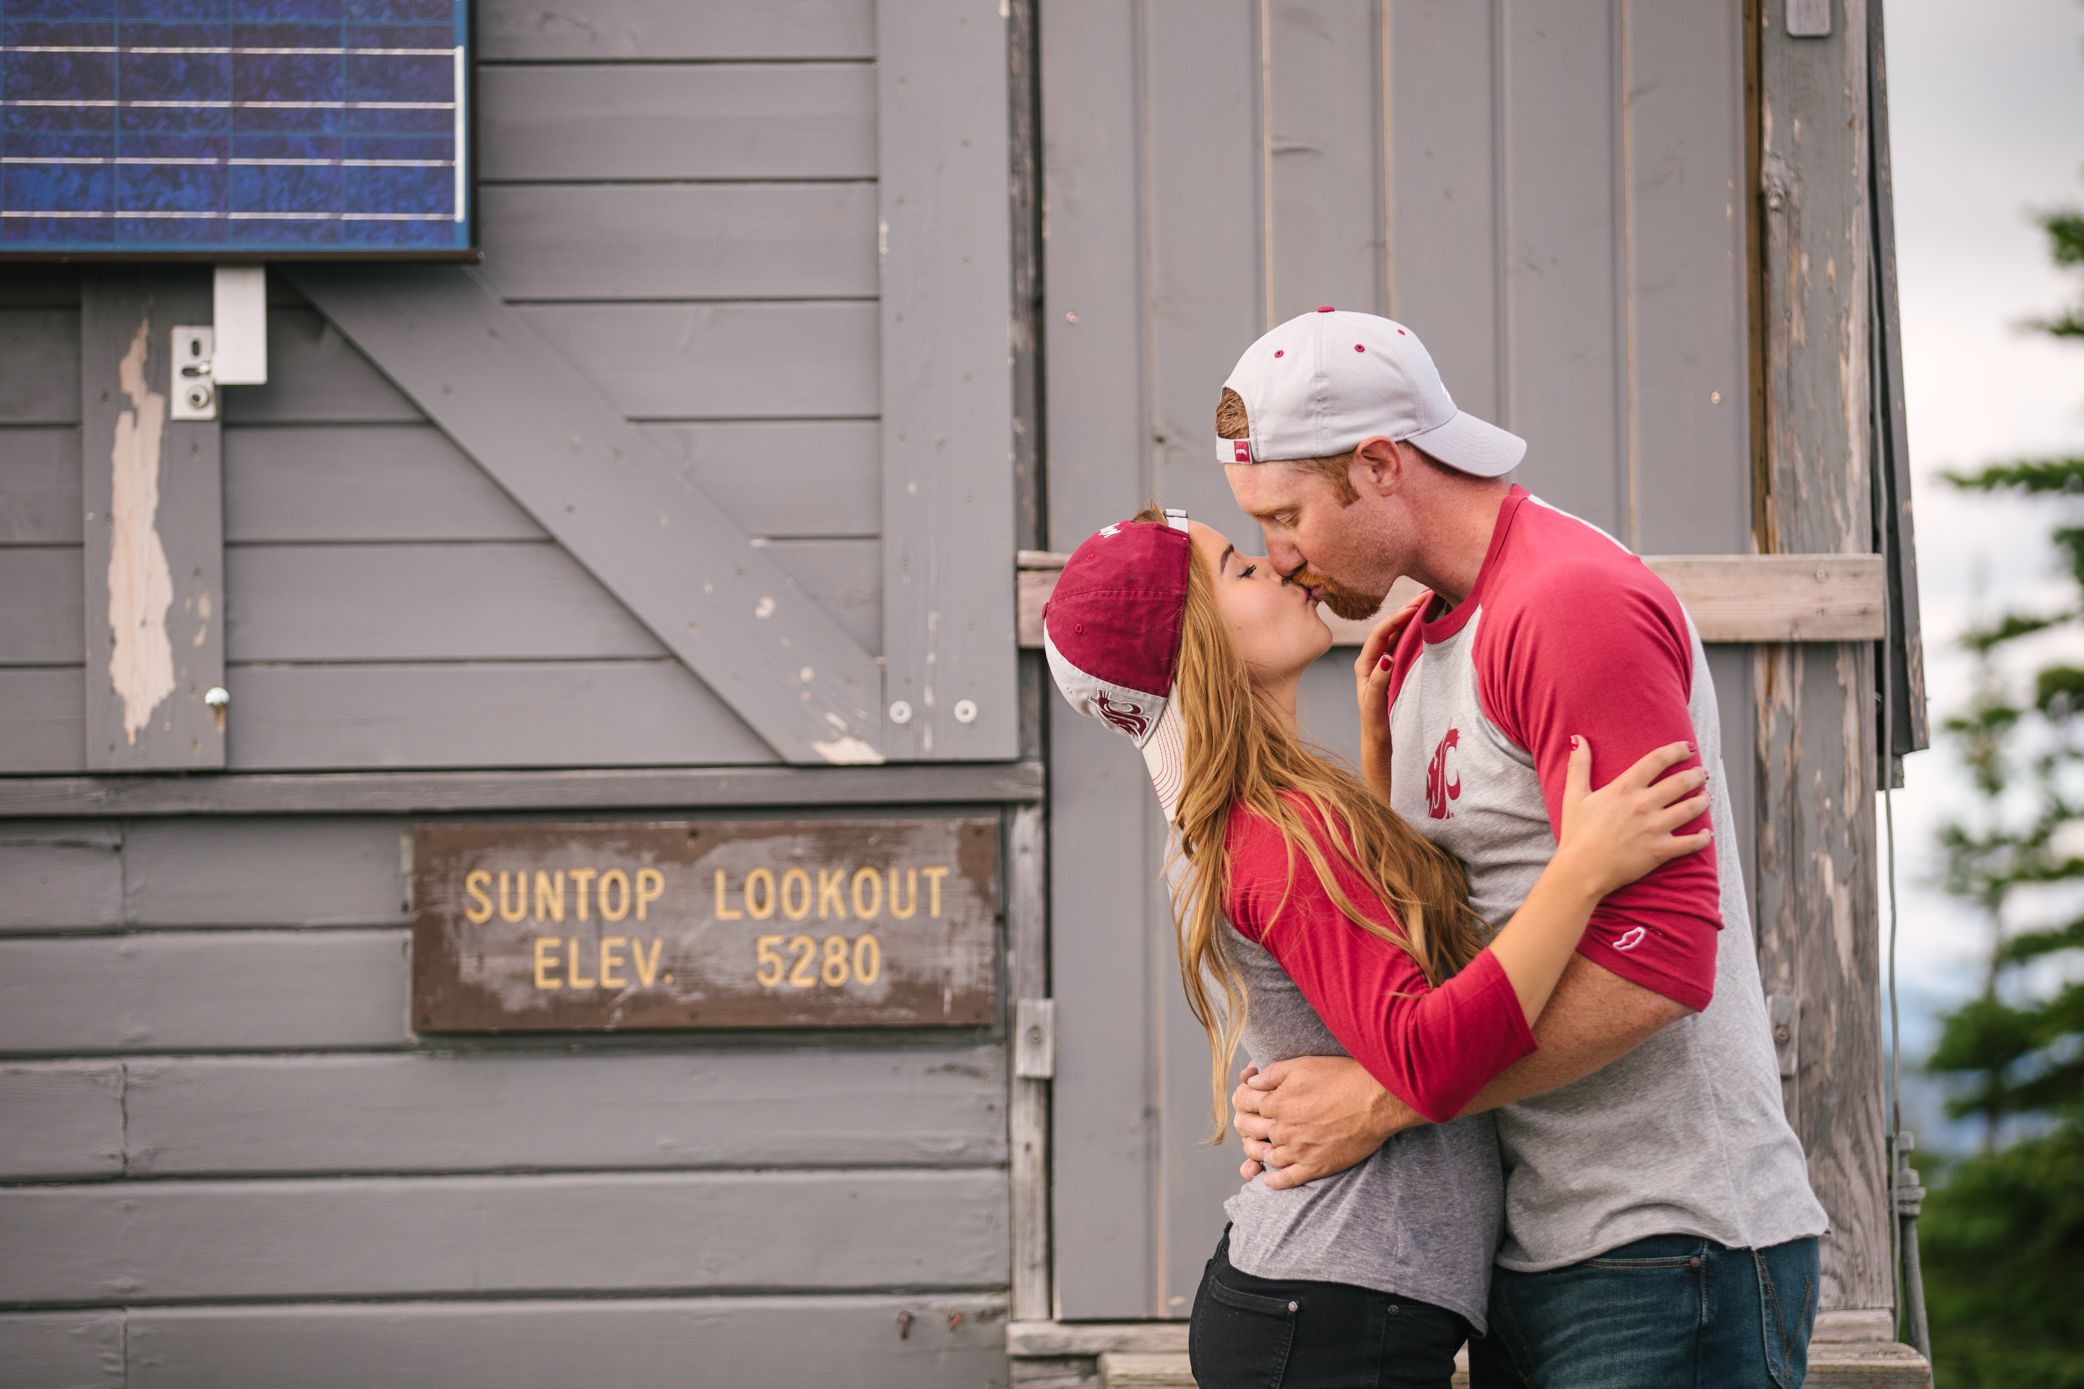 How to personalize your engagement pictures: do your favorite activity together.